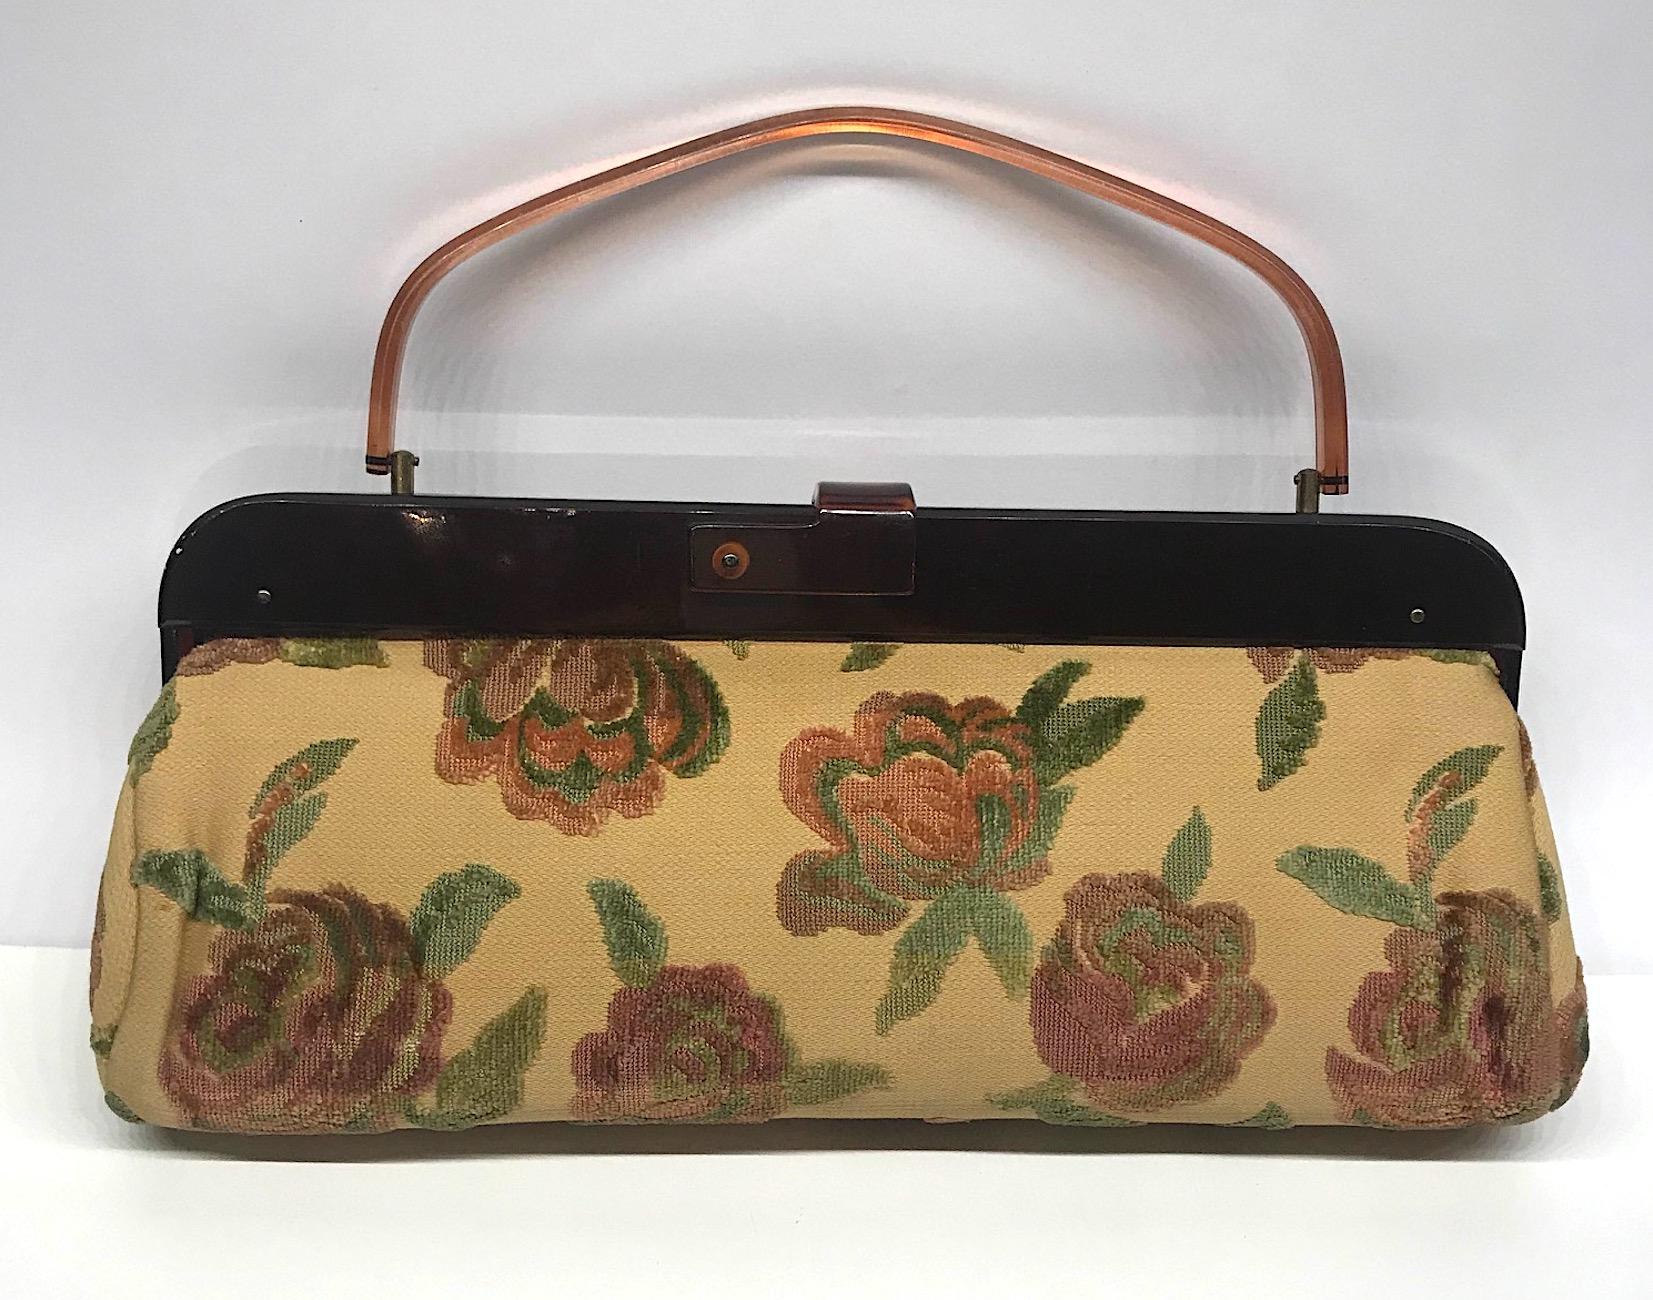 A marvelous example of a 1950s mid century hand bag in cut velvet fabric. The body is elongated measuring just under 16 inches in length, 4.75 inches wide and 6.5 inches high not including the handle. With the handle up the height is 11.5 inches.